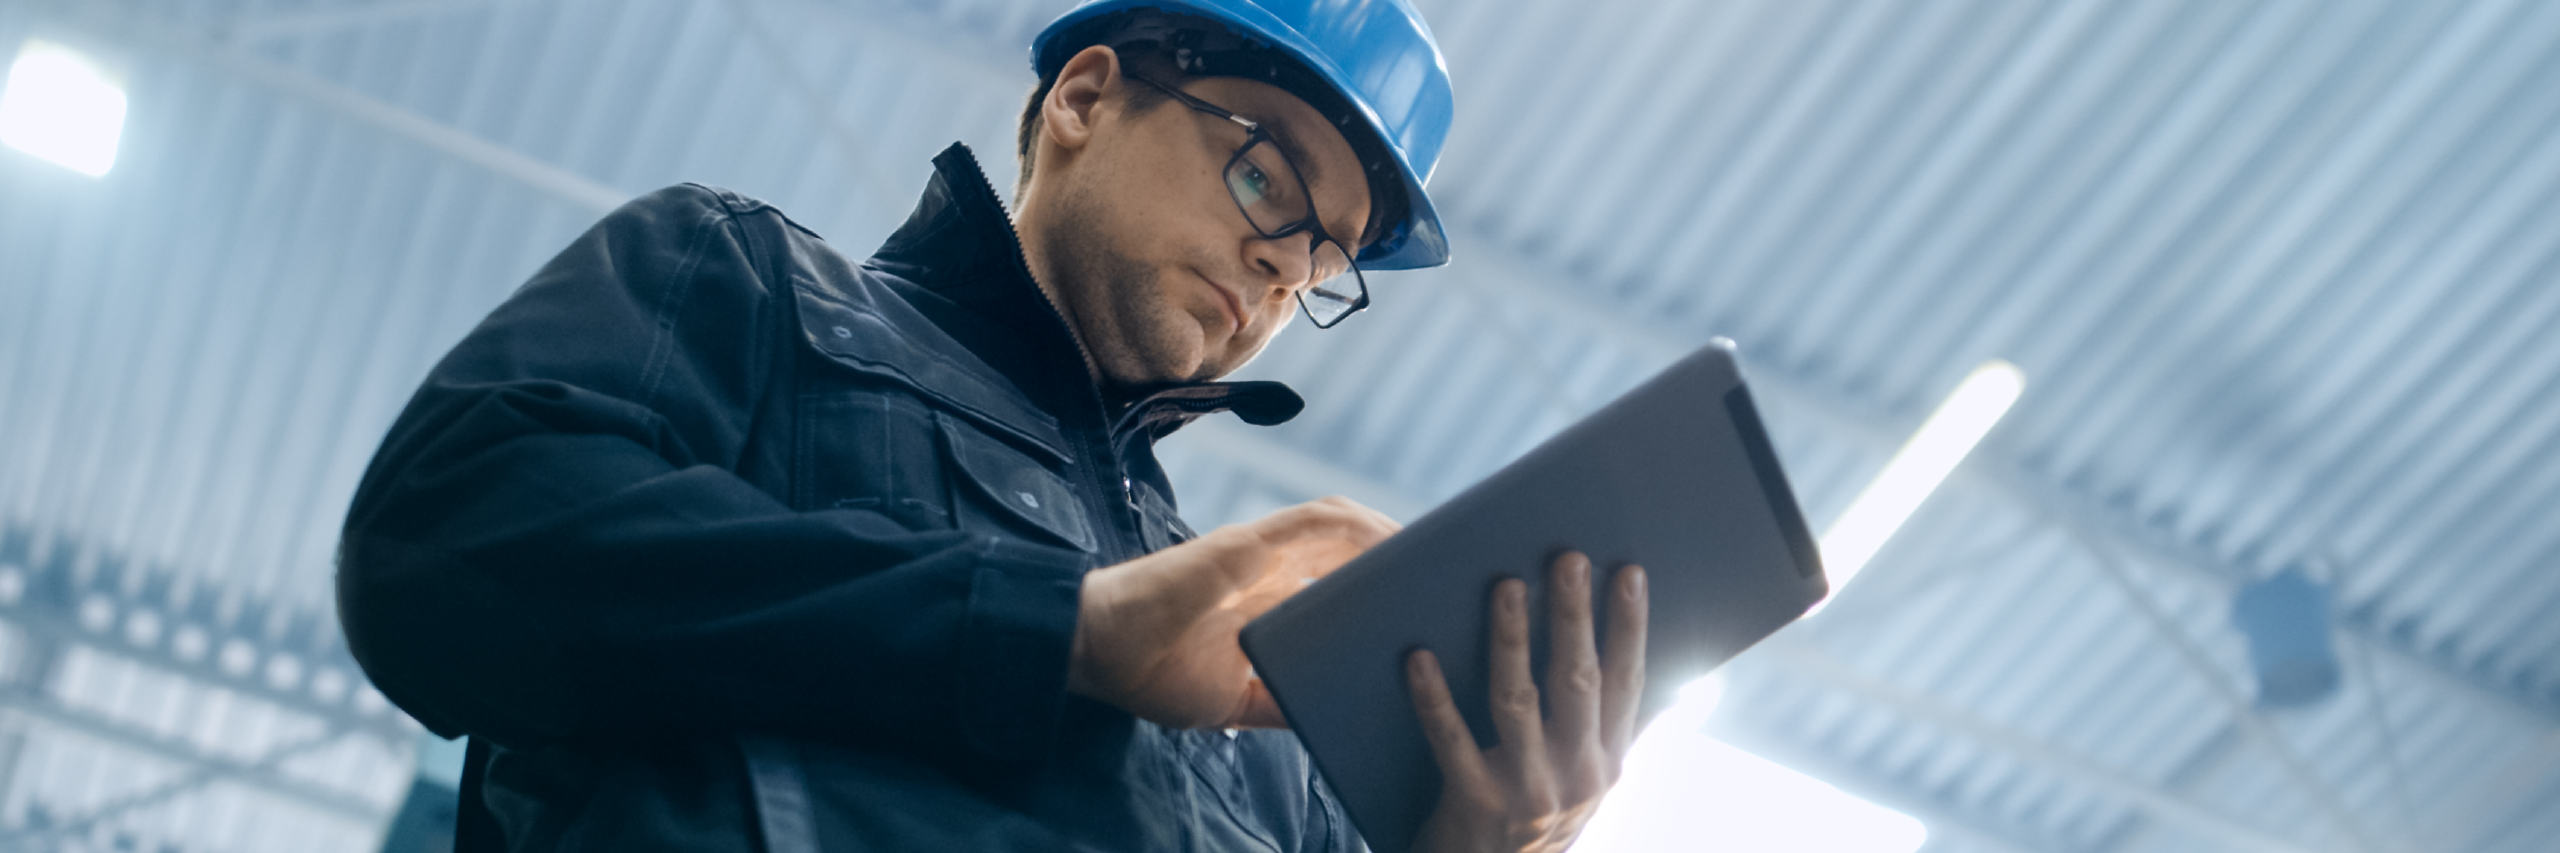 An inspector holding a tablet and wearing a hard hat